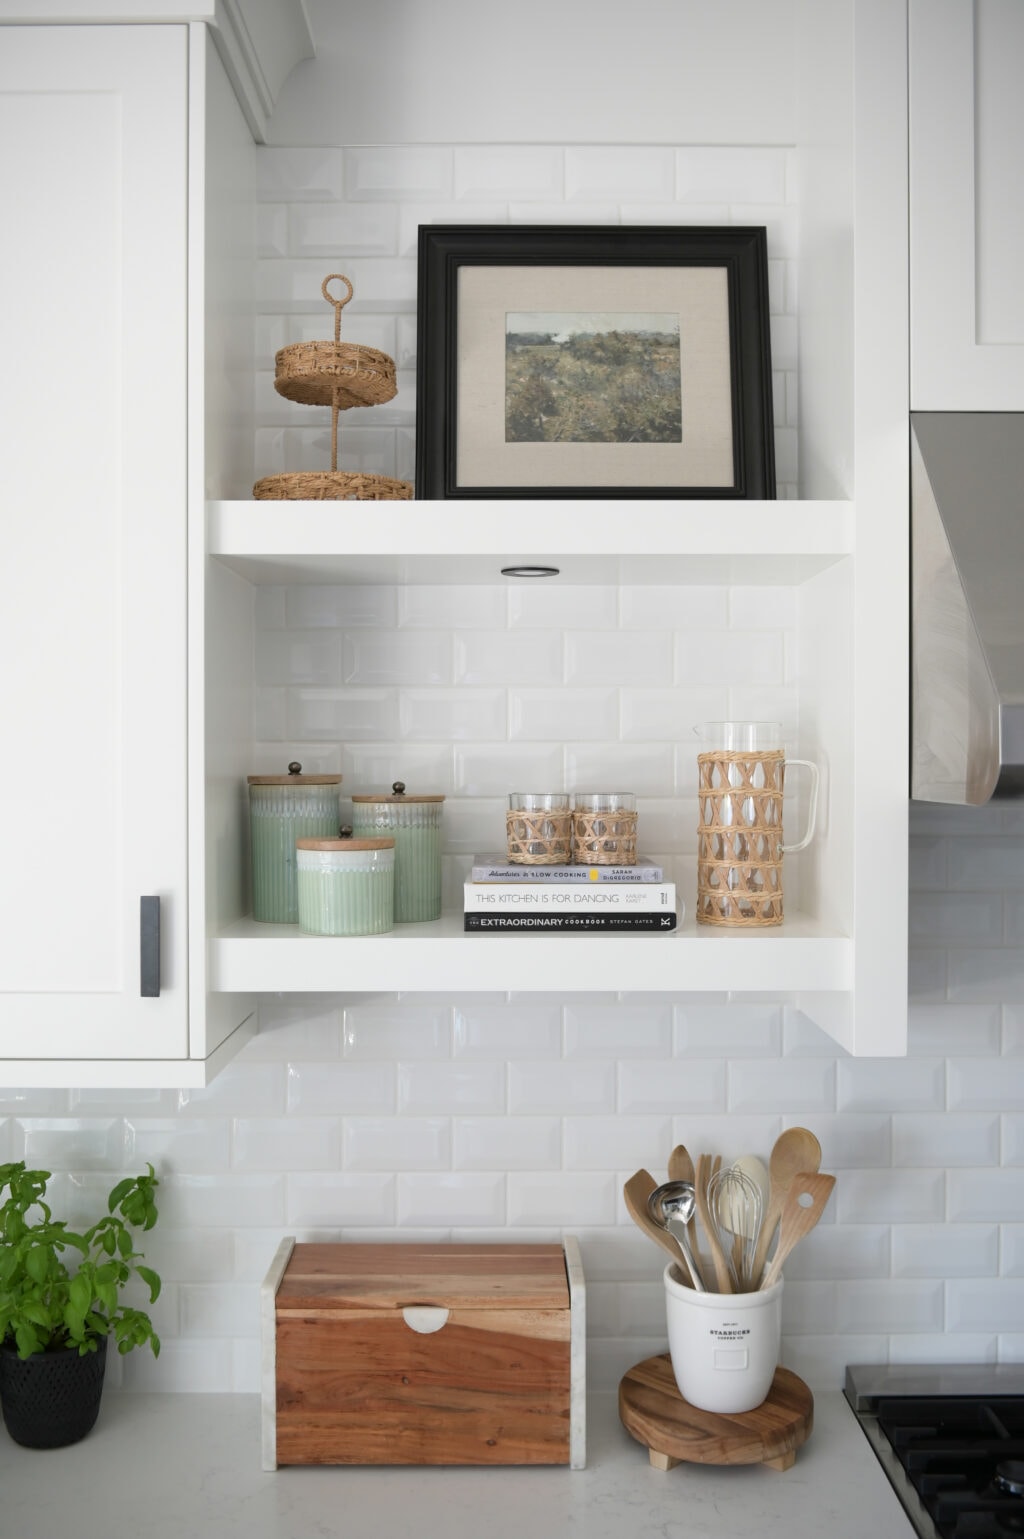 Adding open shelving to your kitchen near the hood